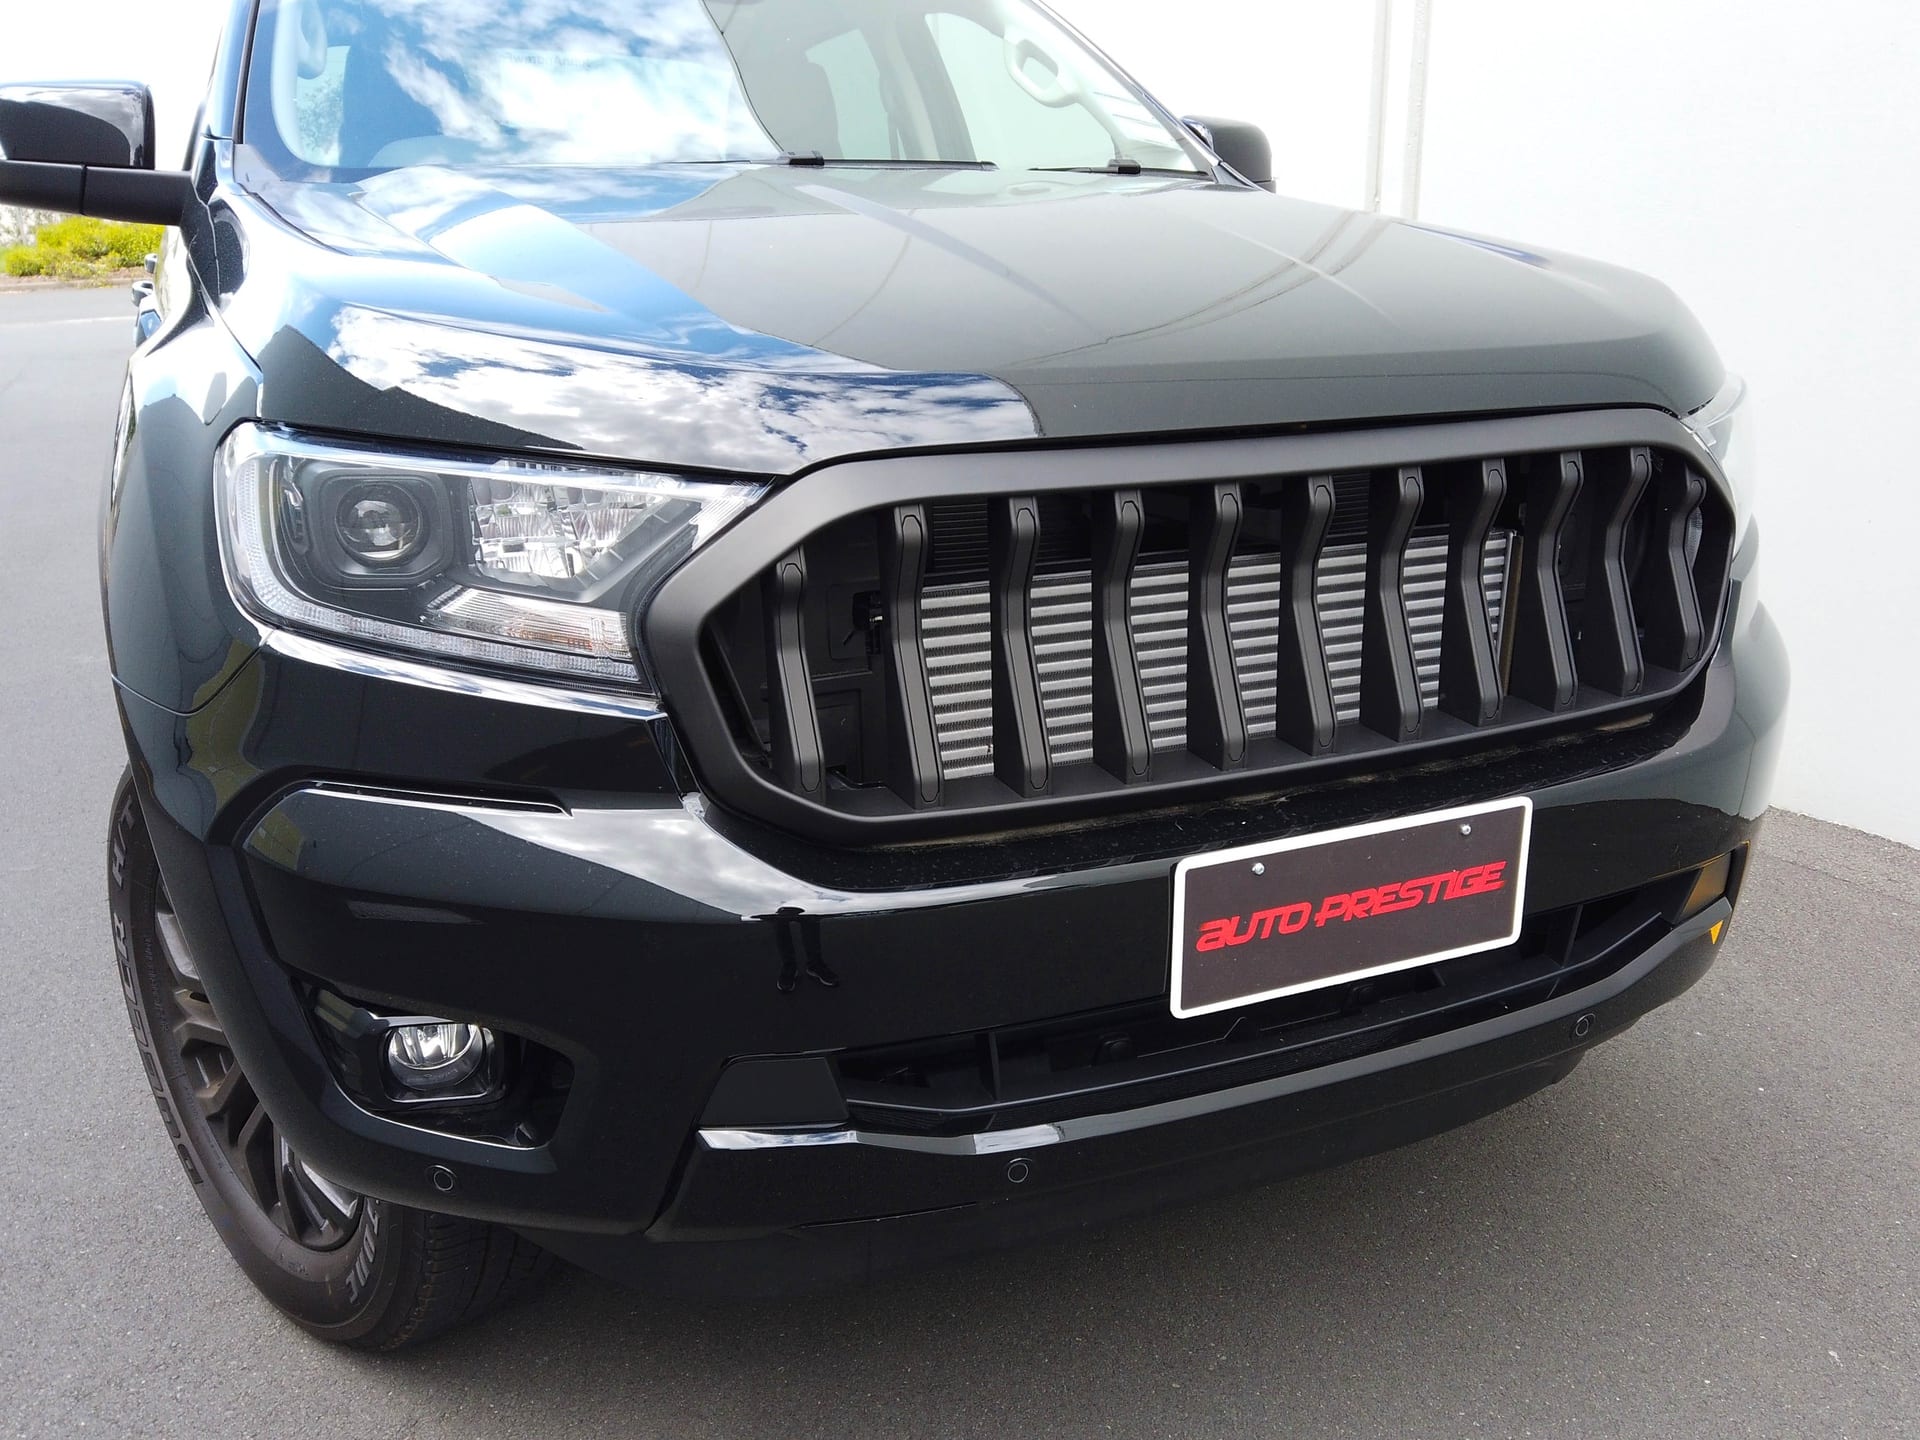 Buy Ford Ranger Front Grill Upgrade | Auto Prestige